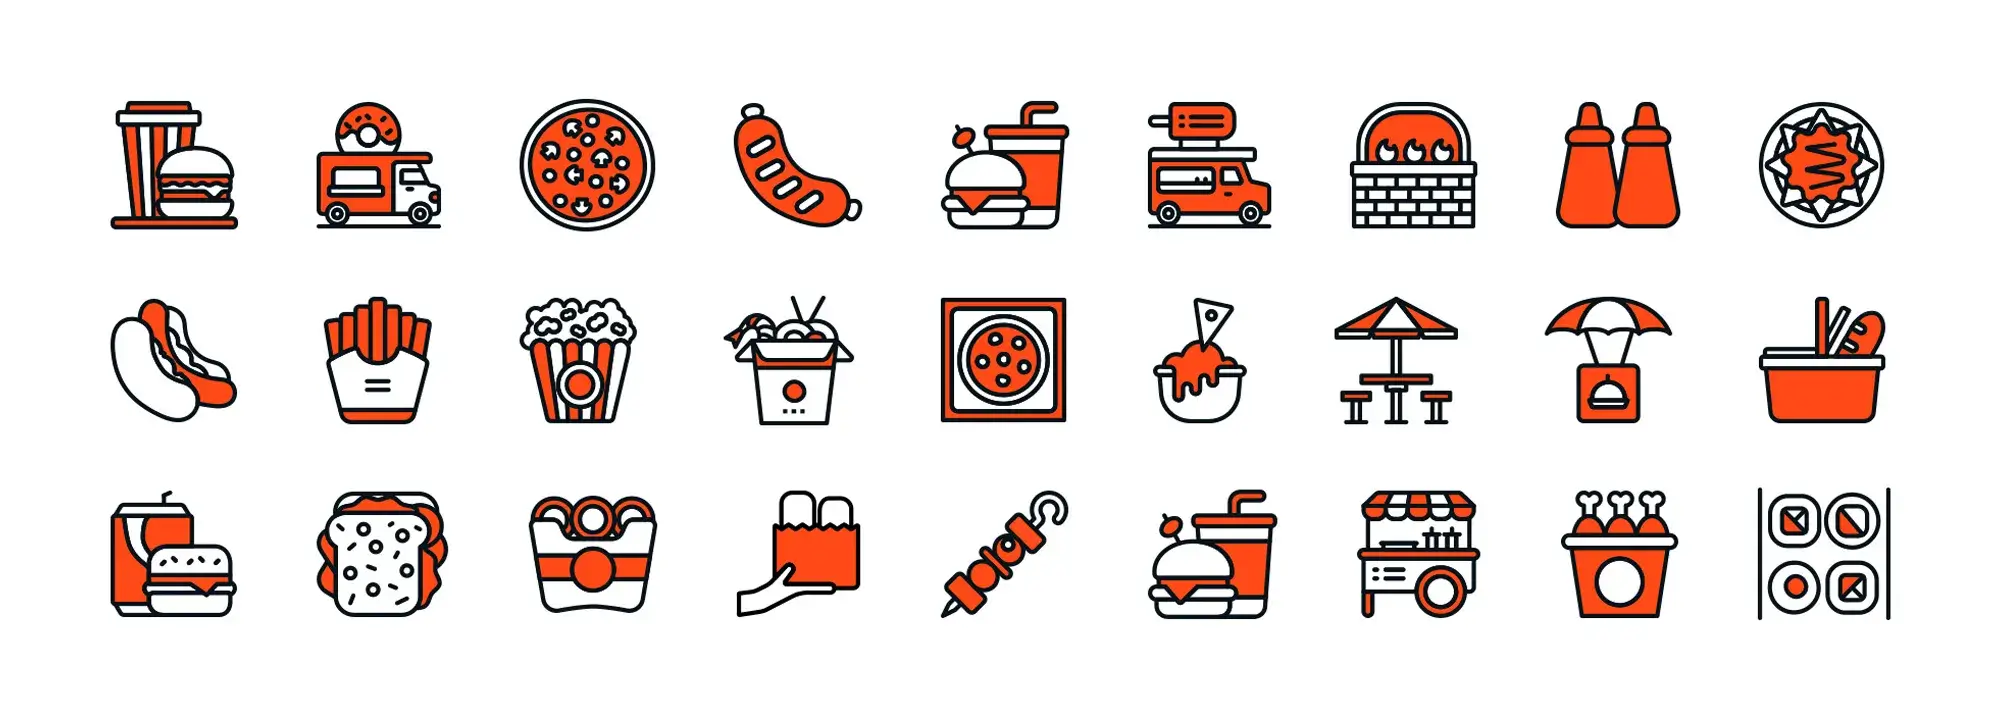 User-friendly library of free icons specifically designed for WordPress